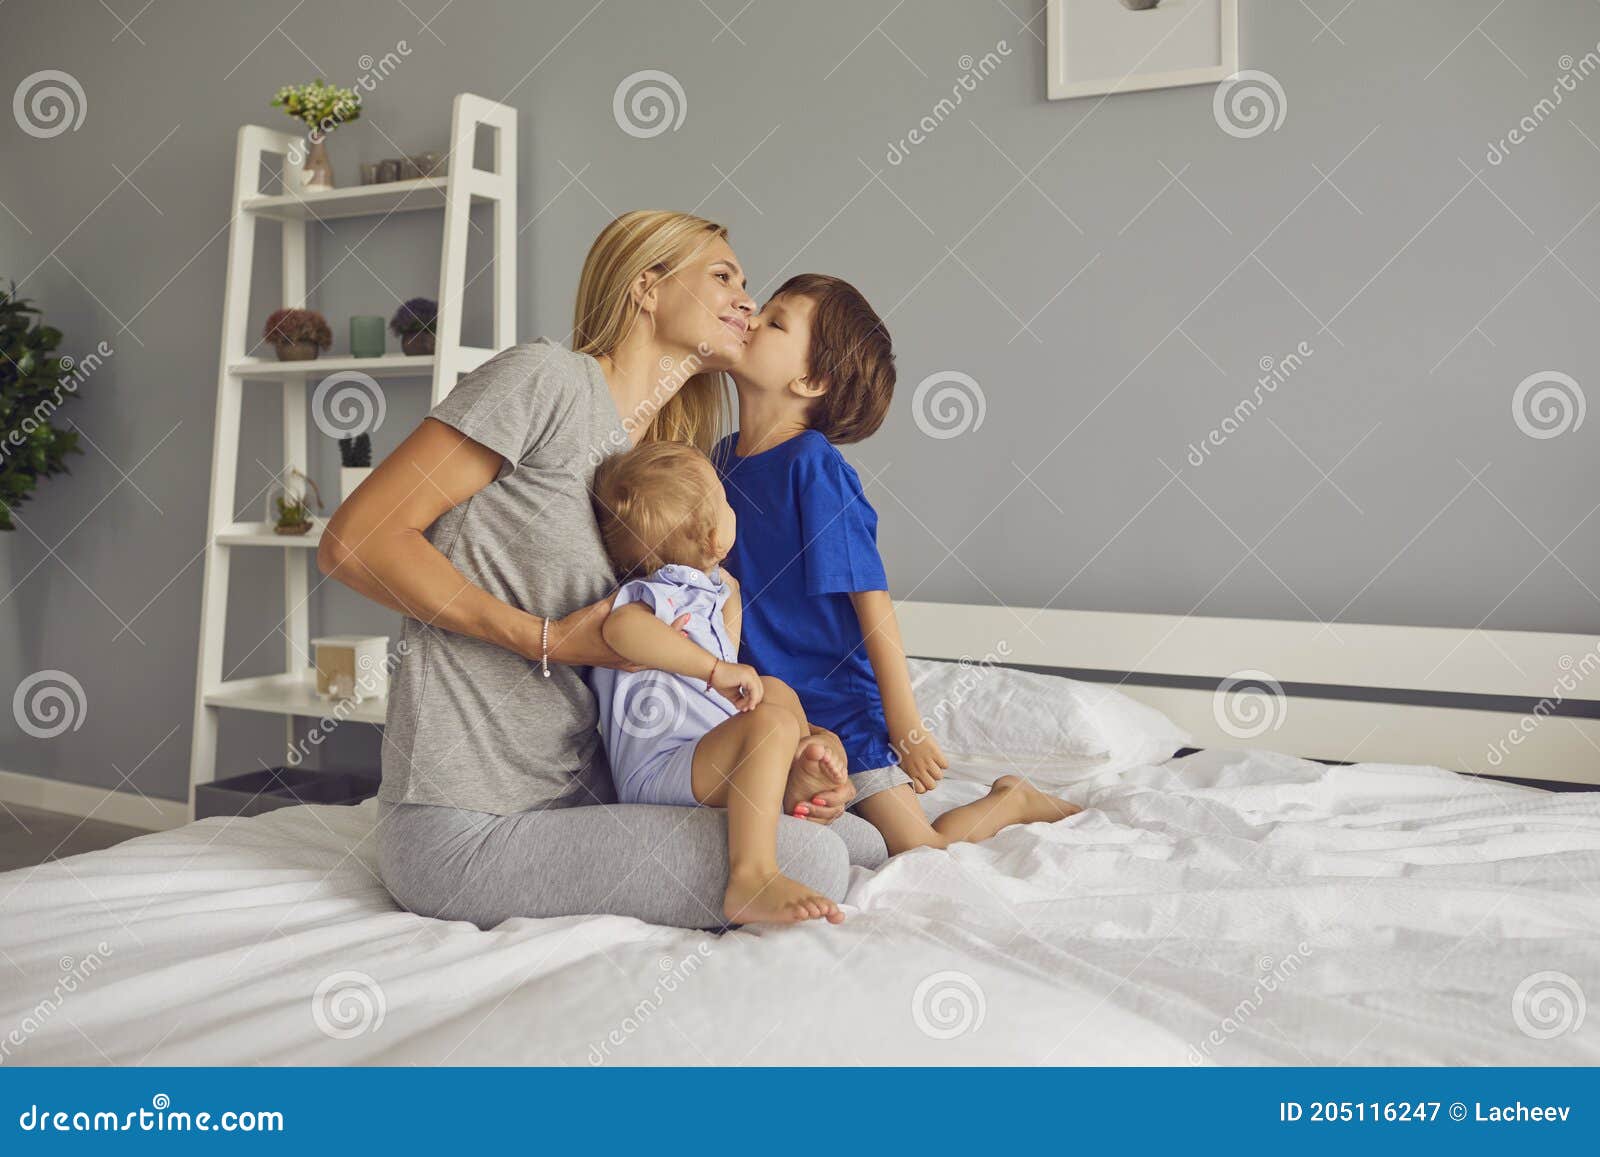 Mom in bed